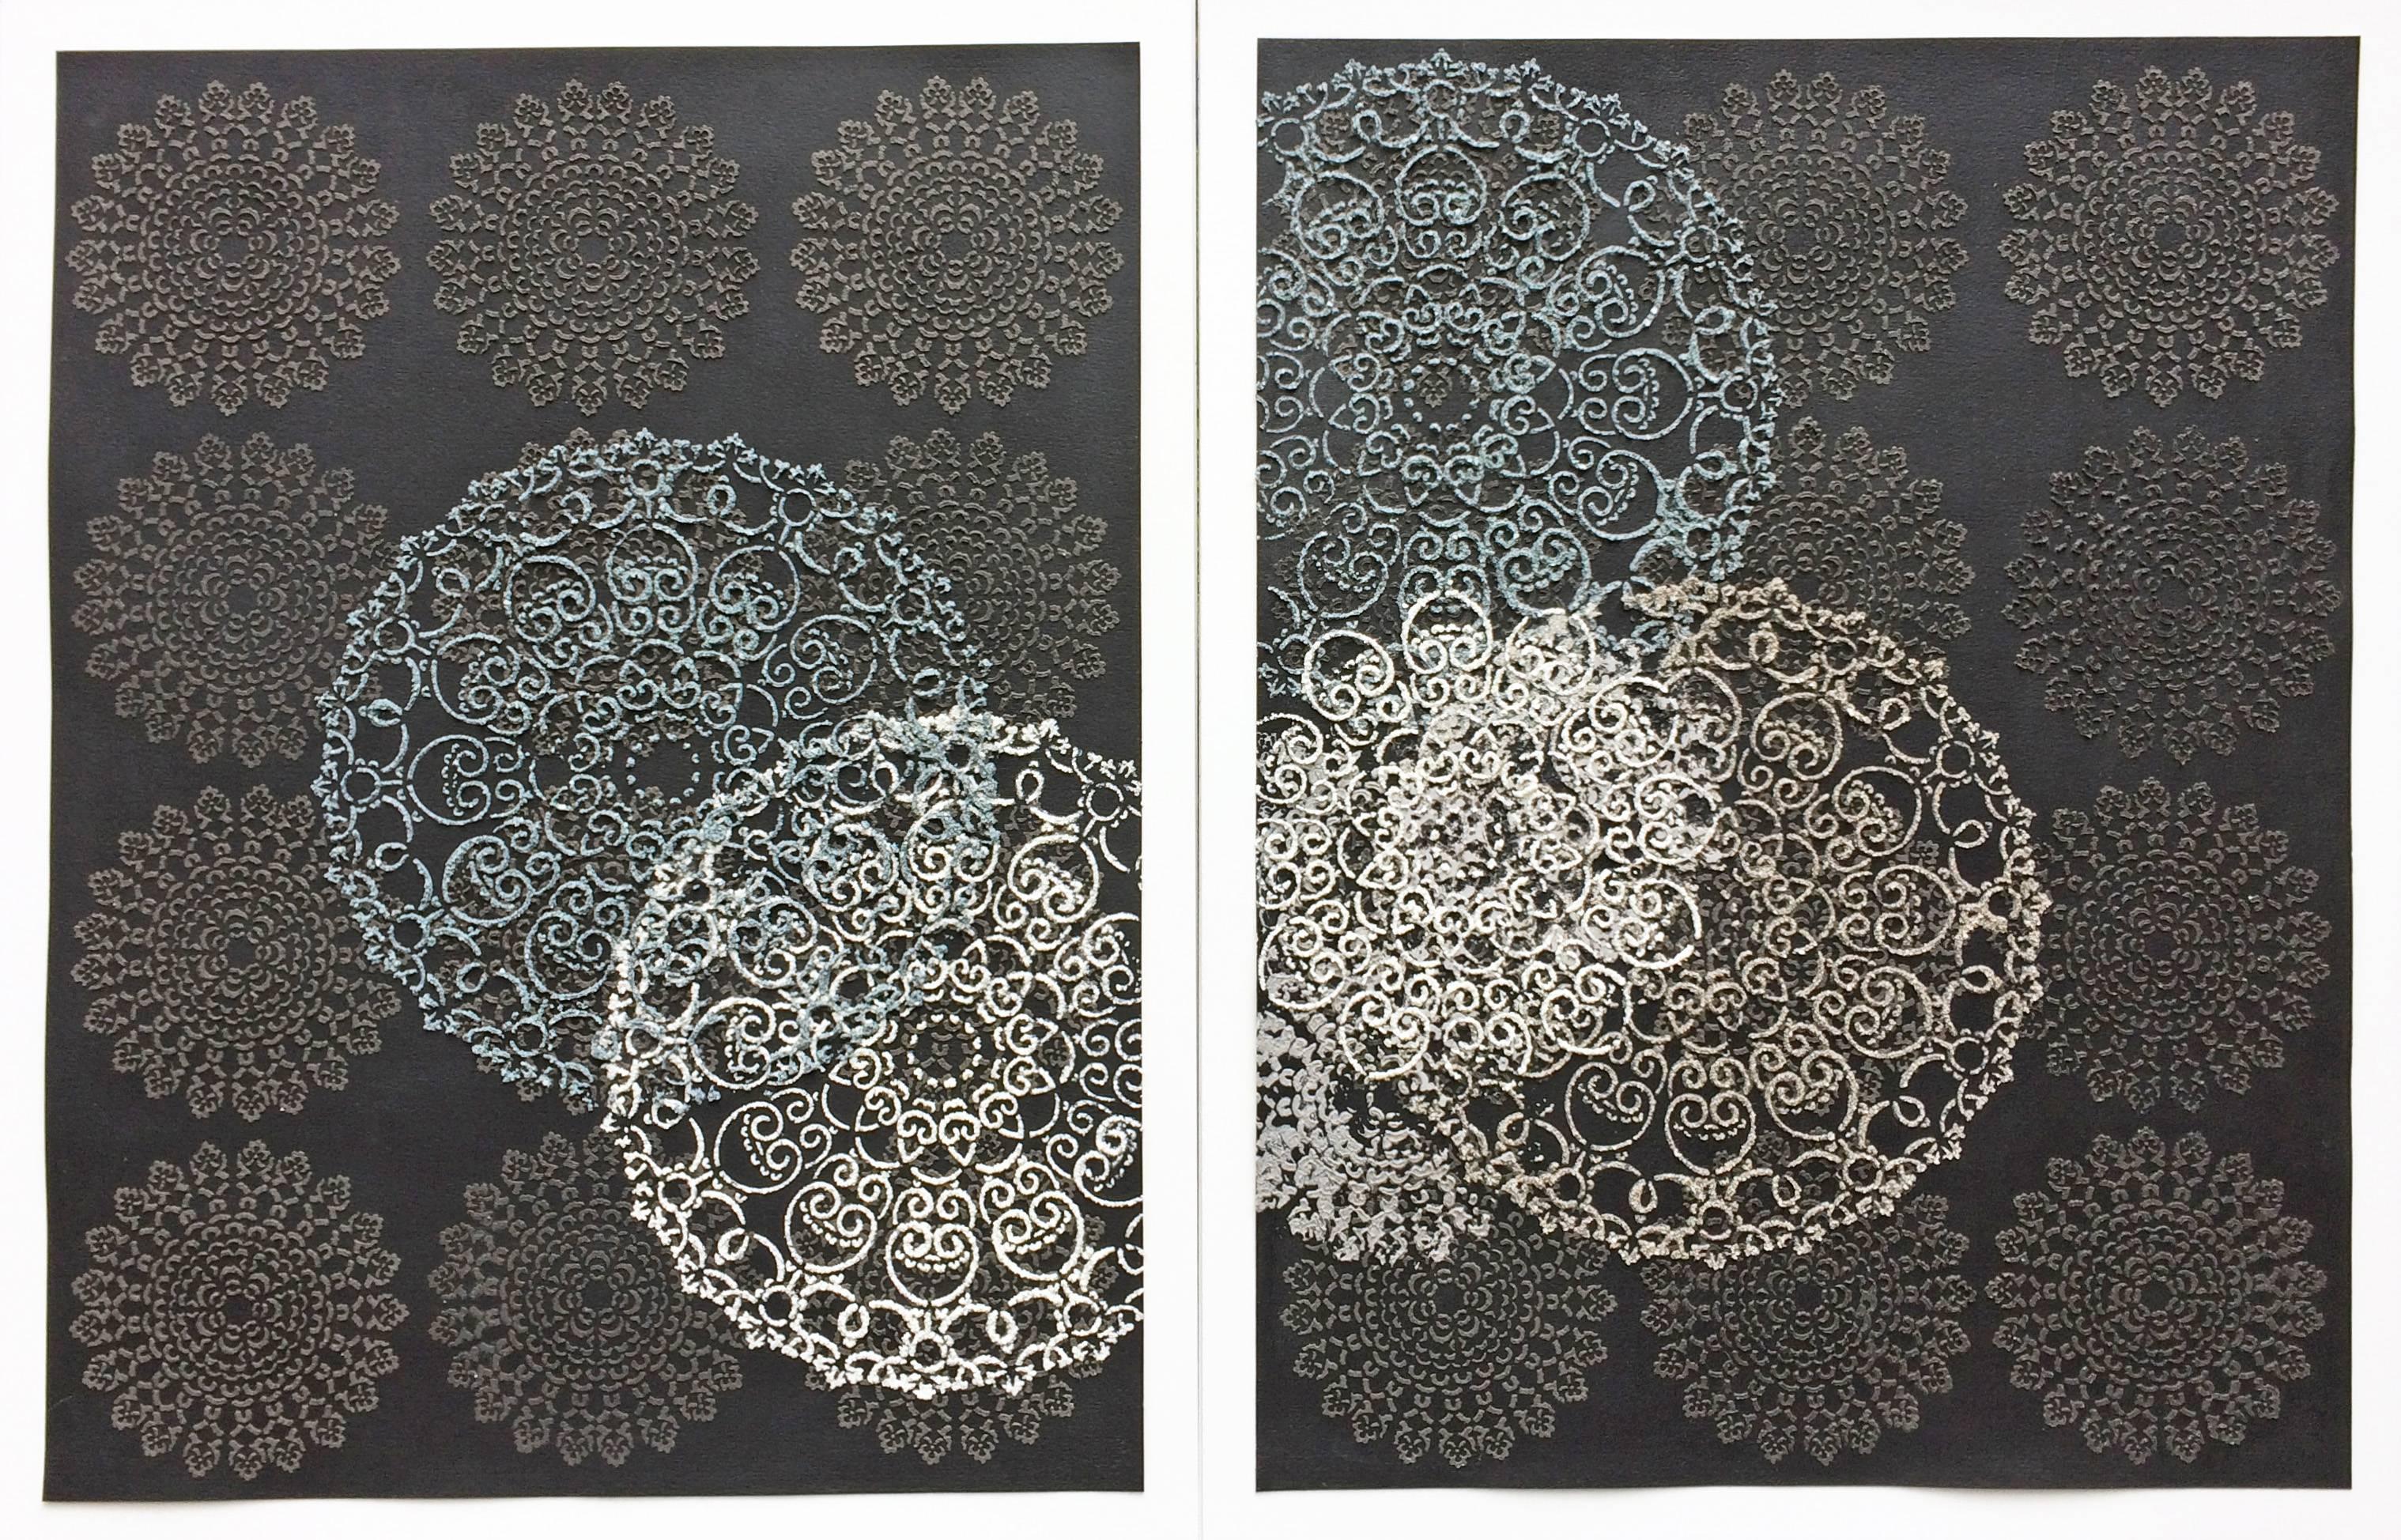 Untitled Diptych, Contemporary Mixed Media Mandala Blue White Textured Patterns - Mixed Media Art by Eleanor White